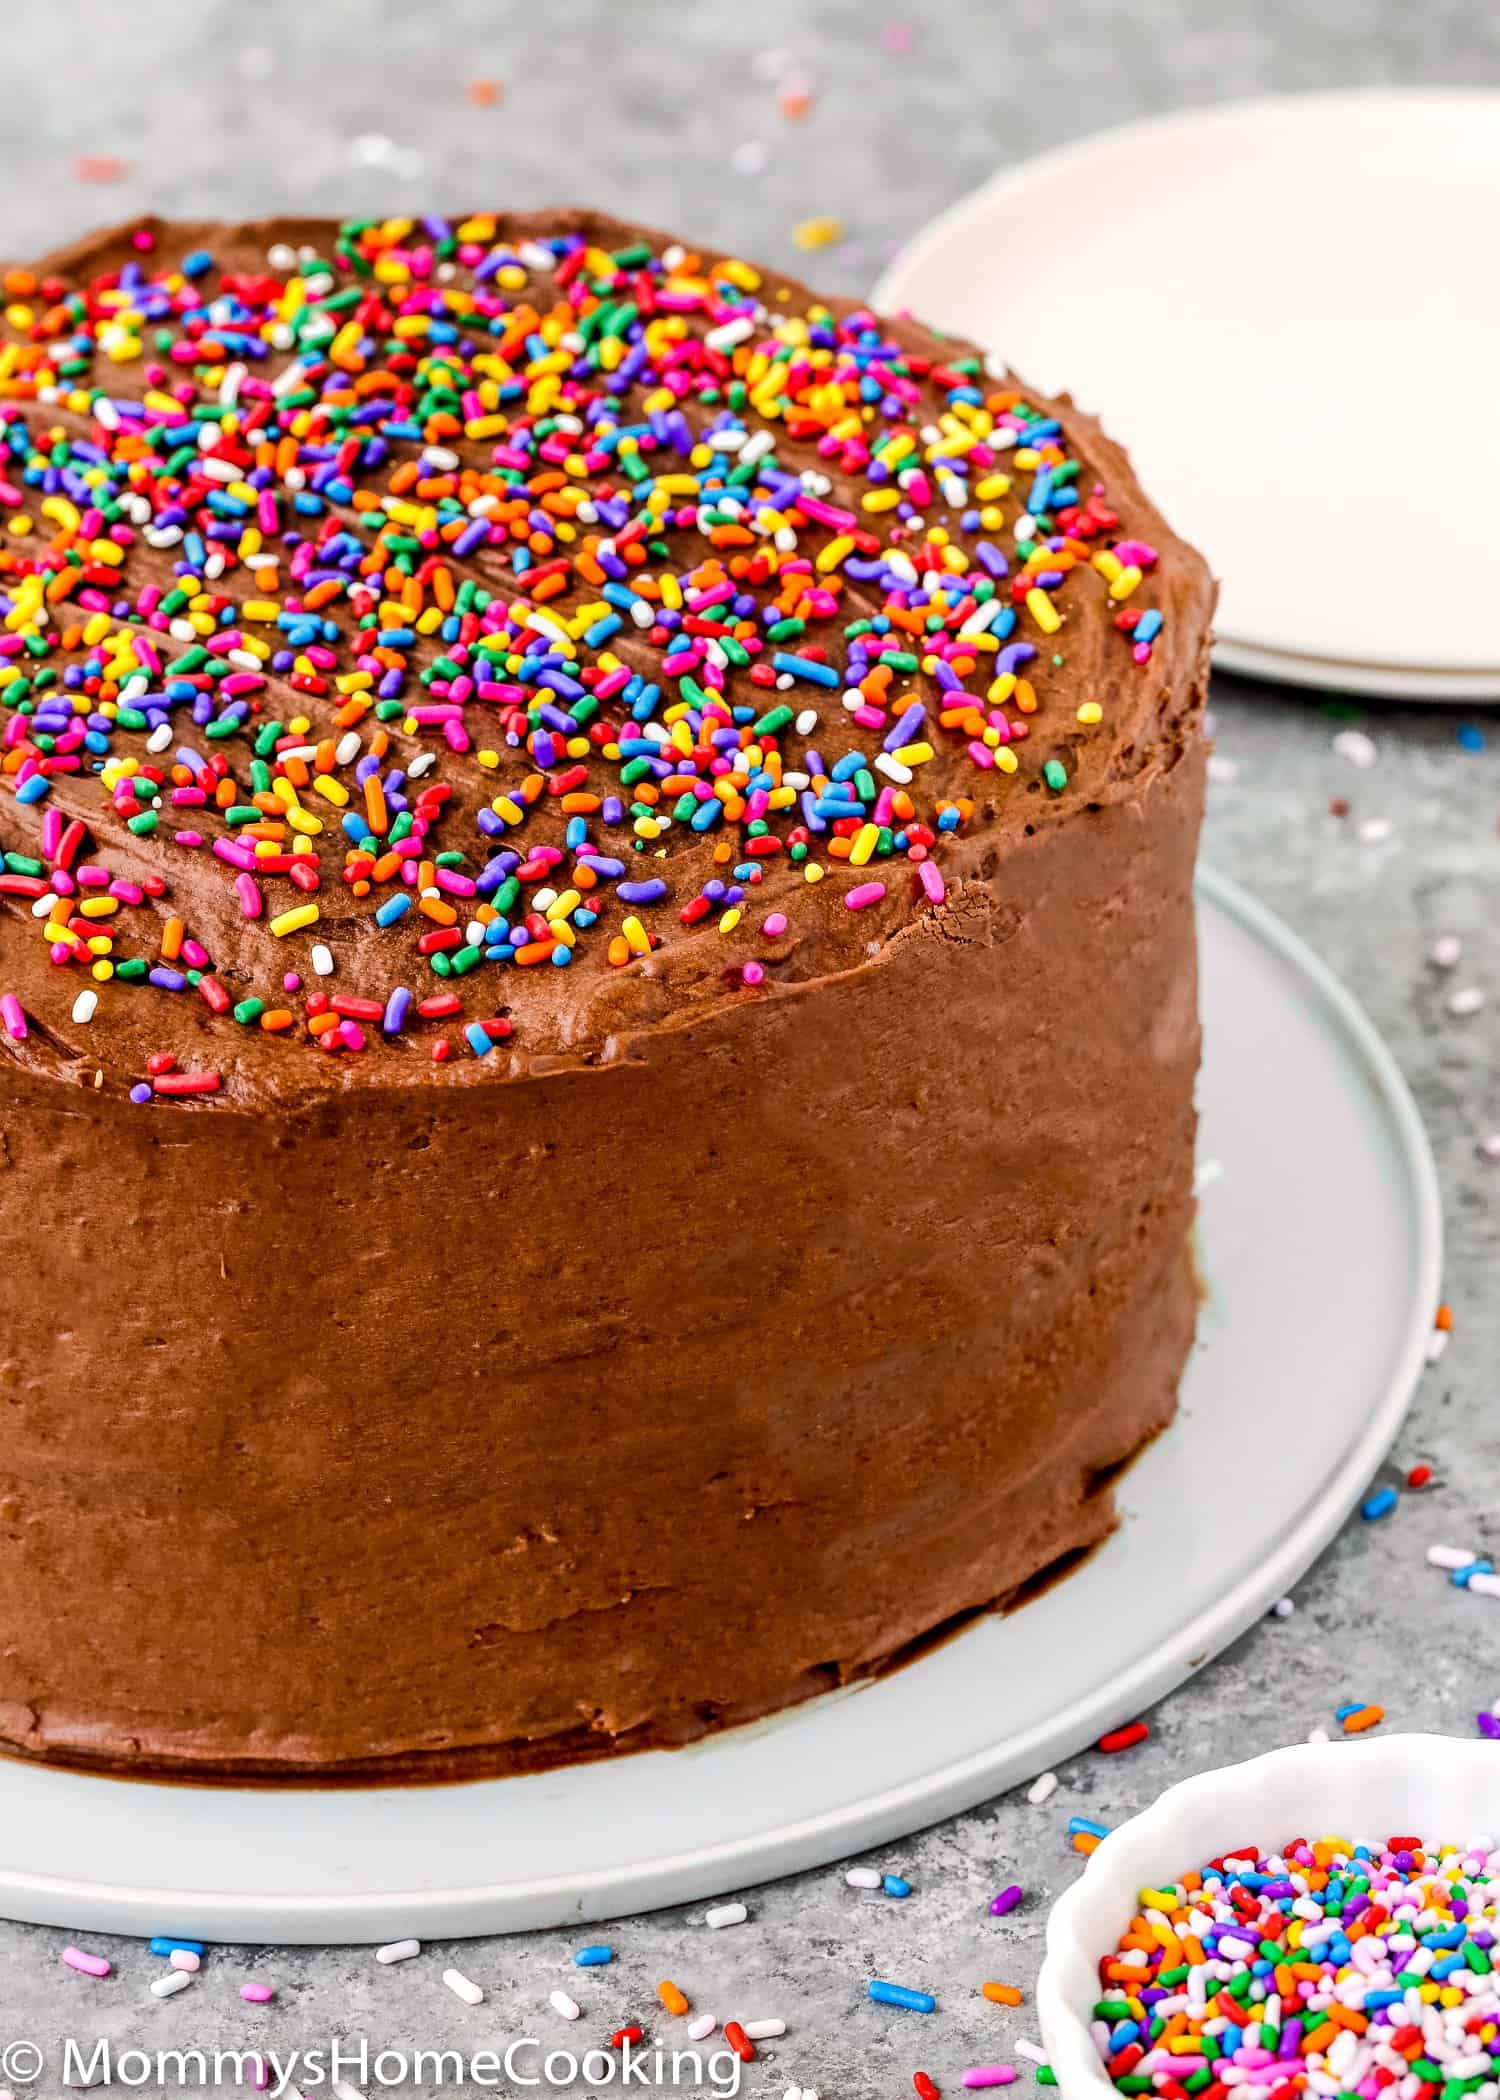 Egg-free cake make with a cake mix box, covered with chocolate buttercream and sprinkles.